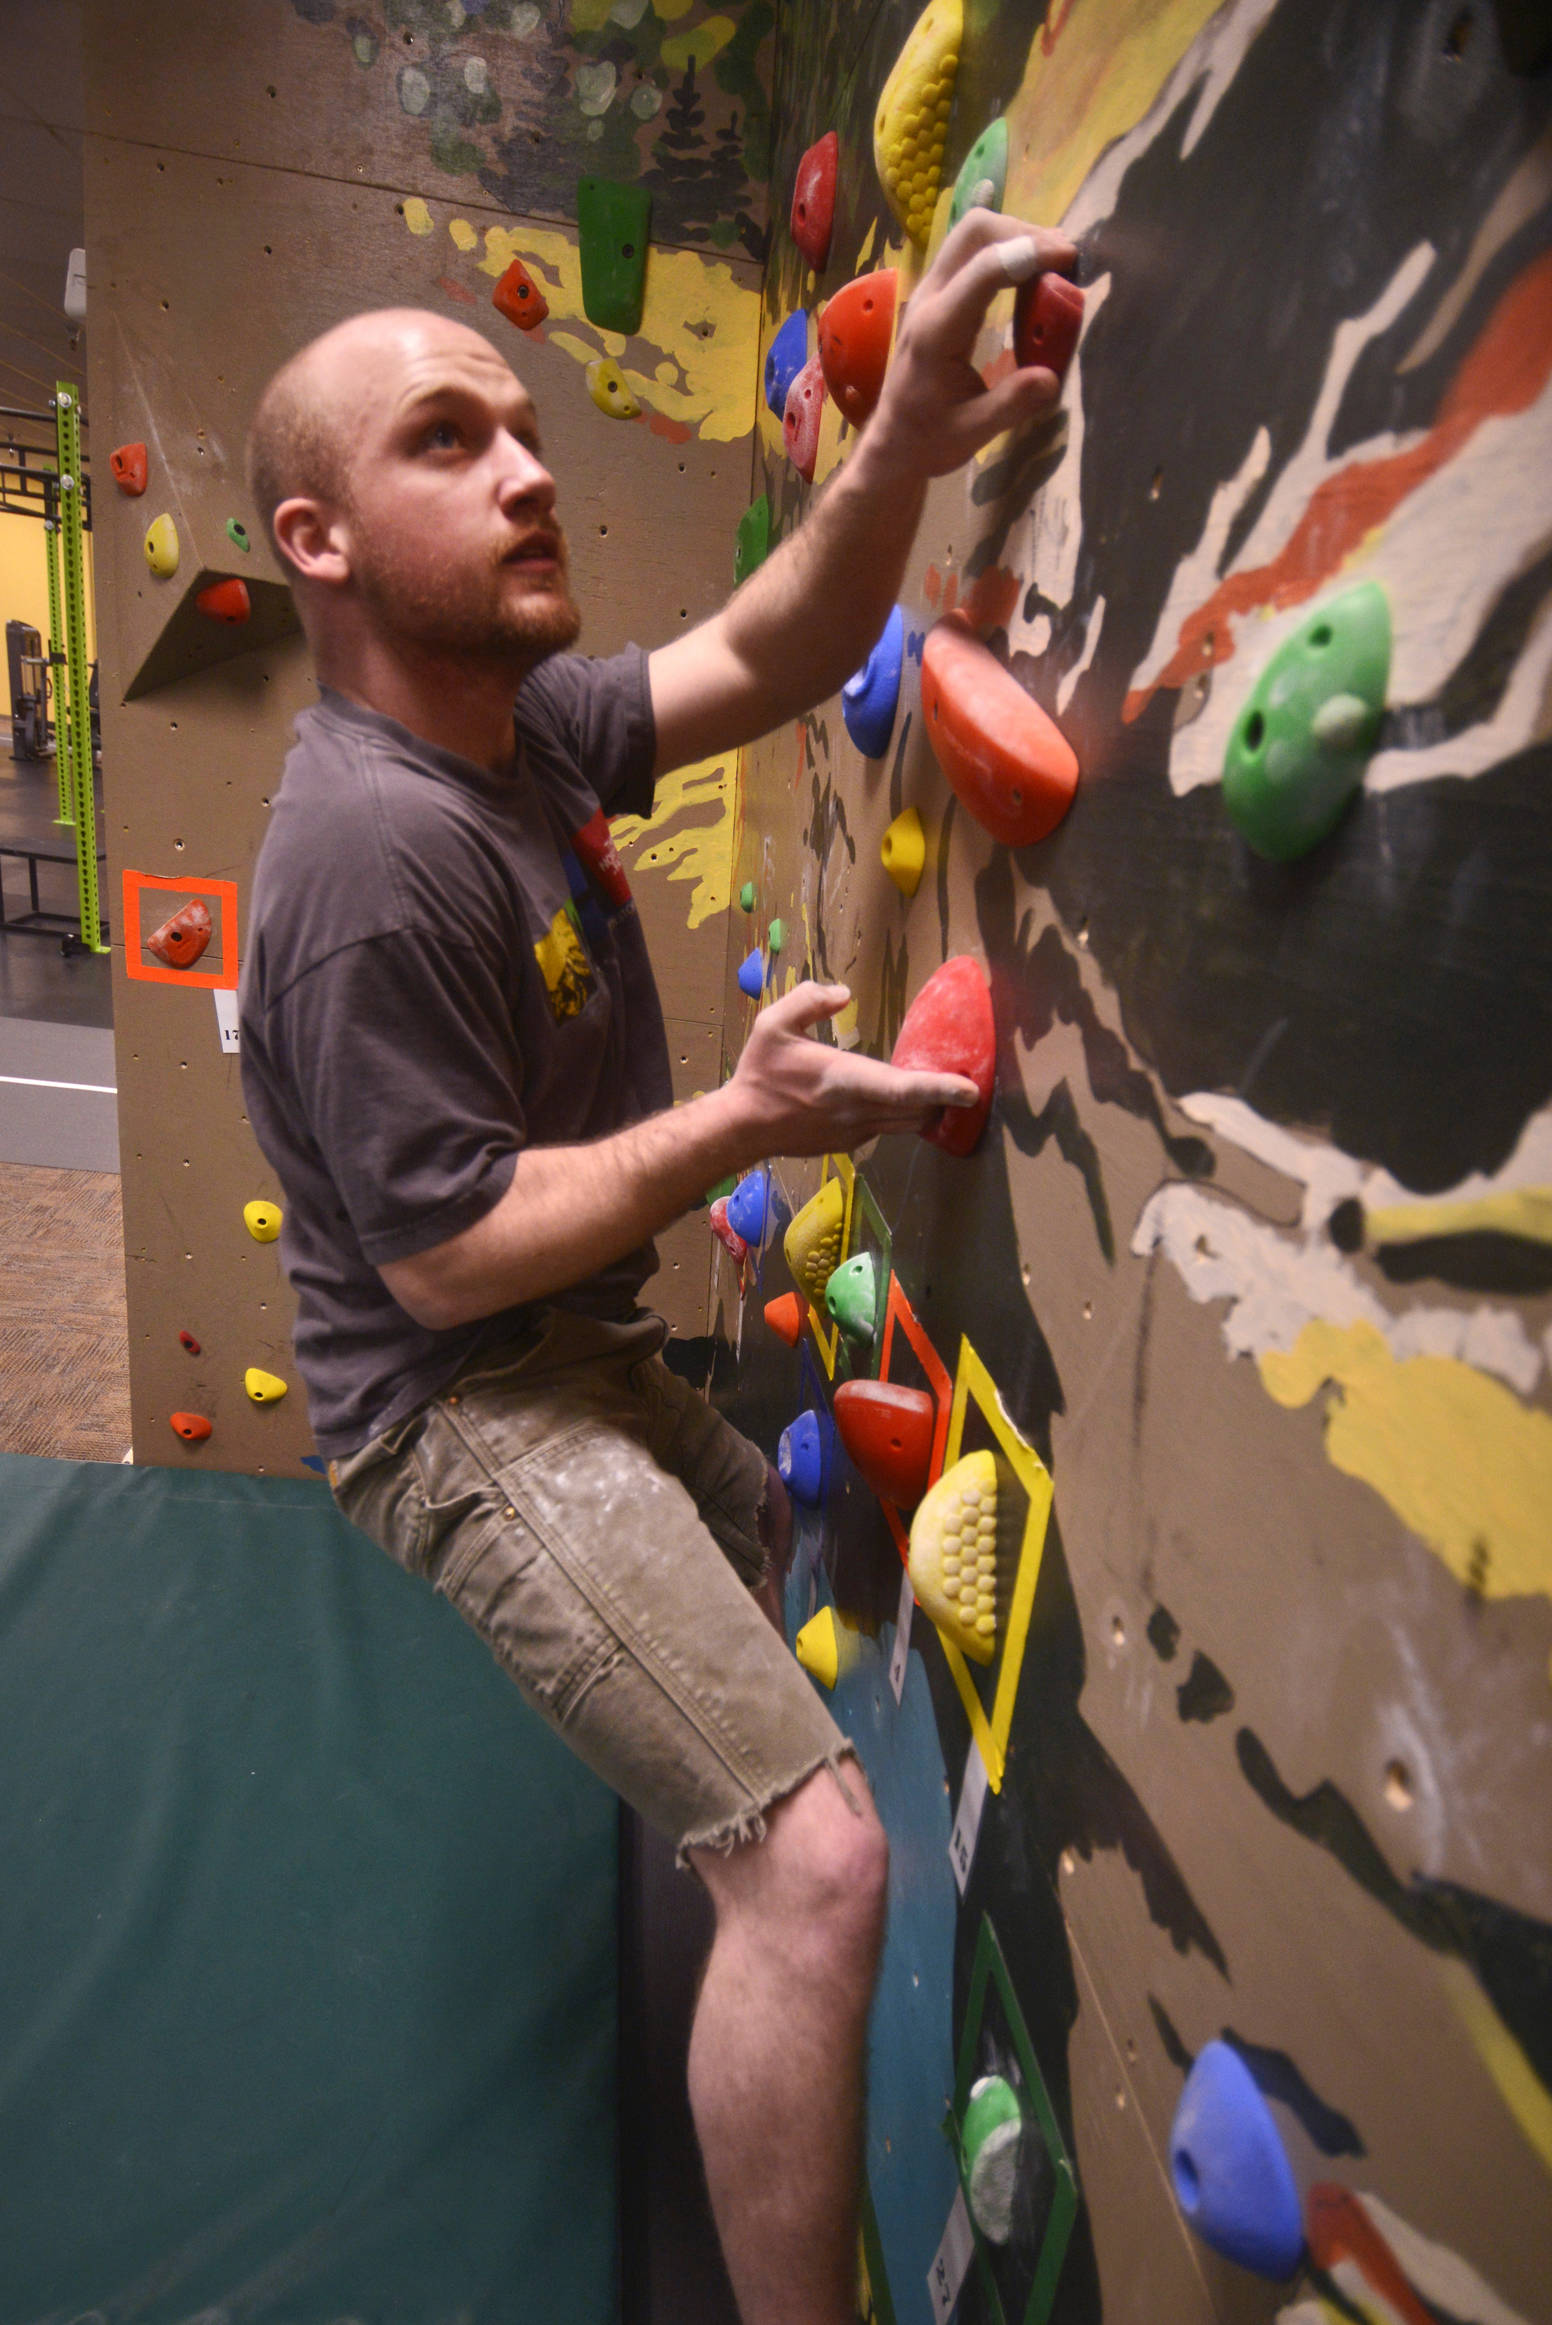 John Walker makes his way through a bouldering route on River City Wellness Center’s new climbing wall on Saturday, April 8, 2017 in Soldotna, Alaska.